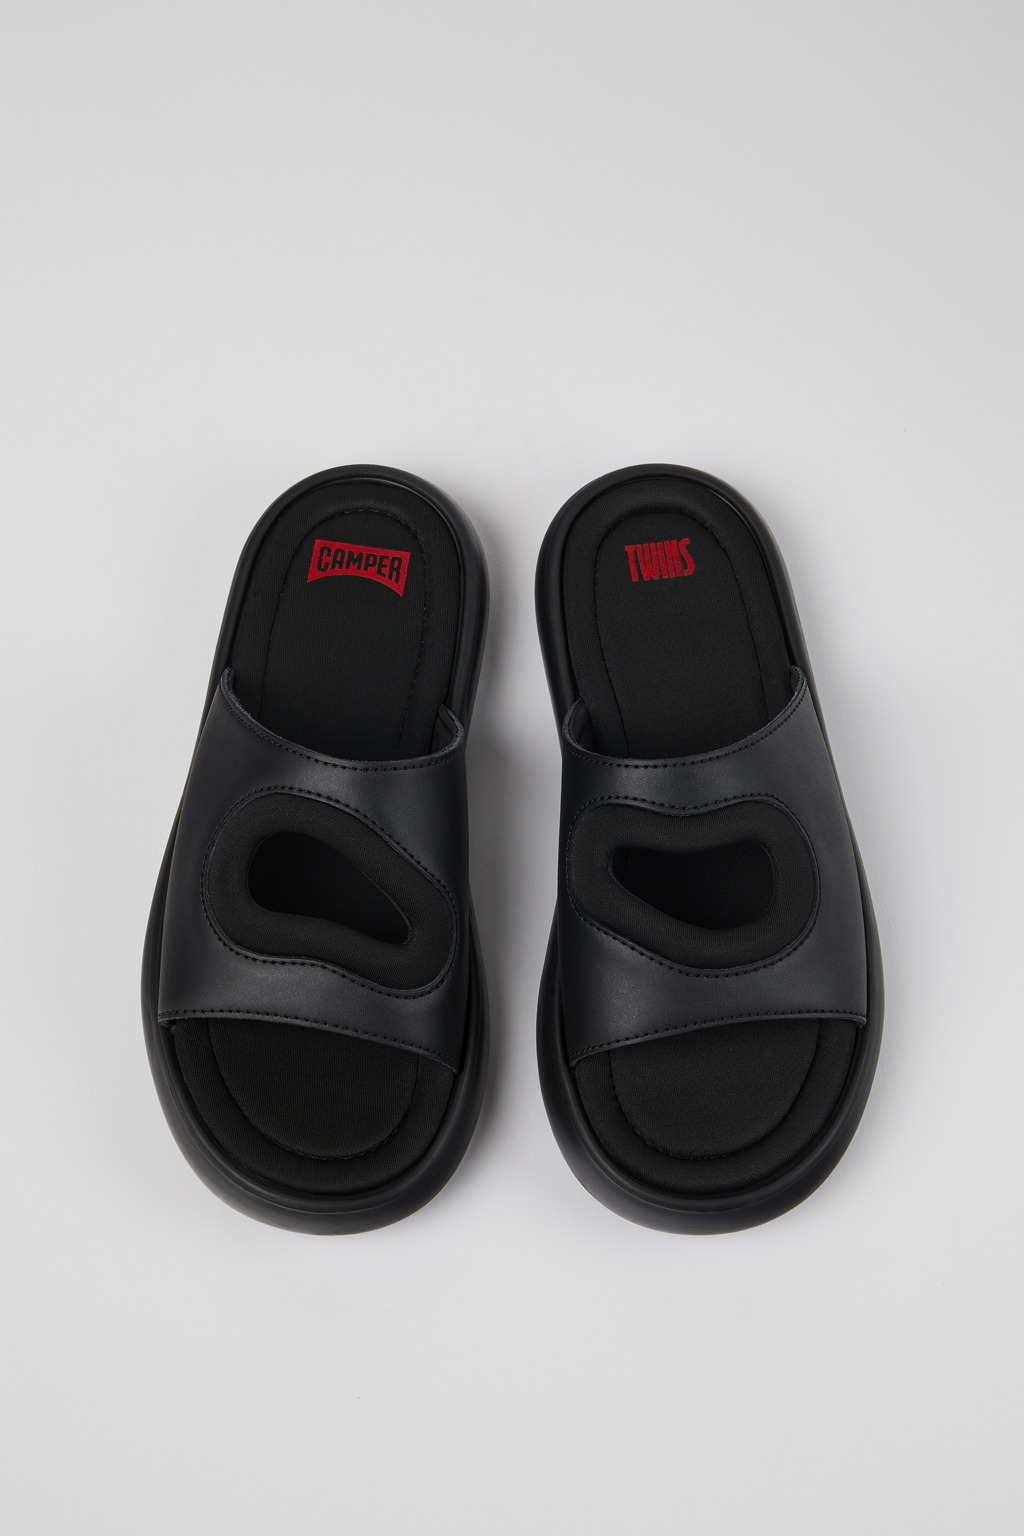 Twins Black Sandals for Women - Spring/Summer collection 